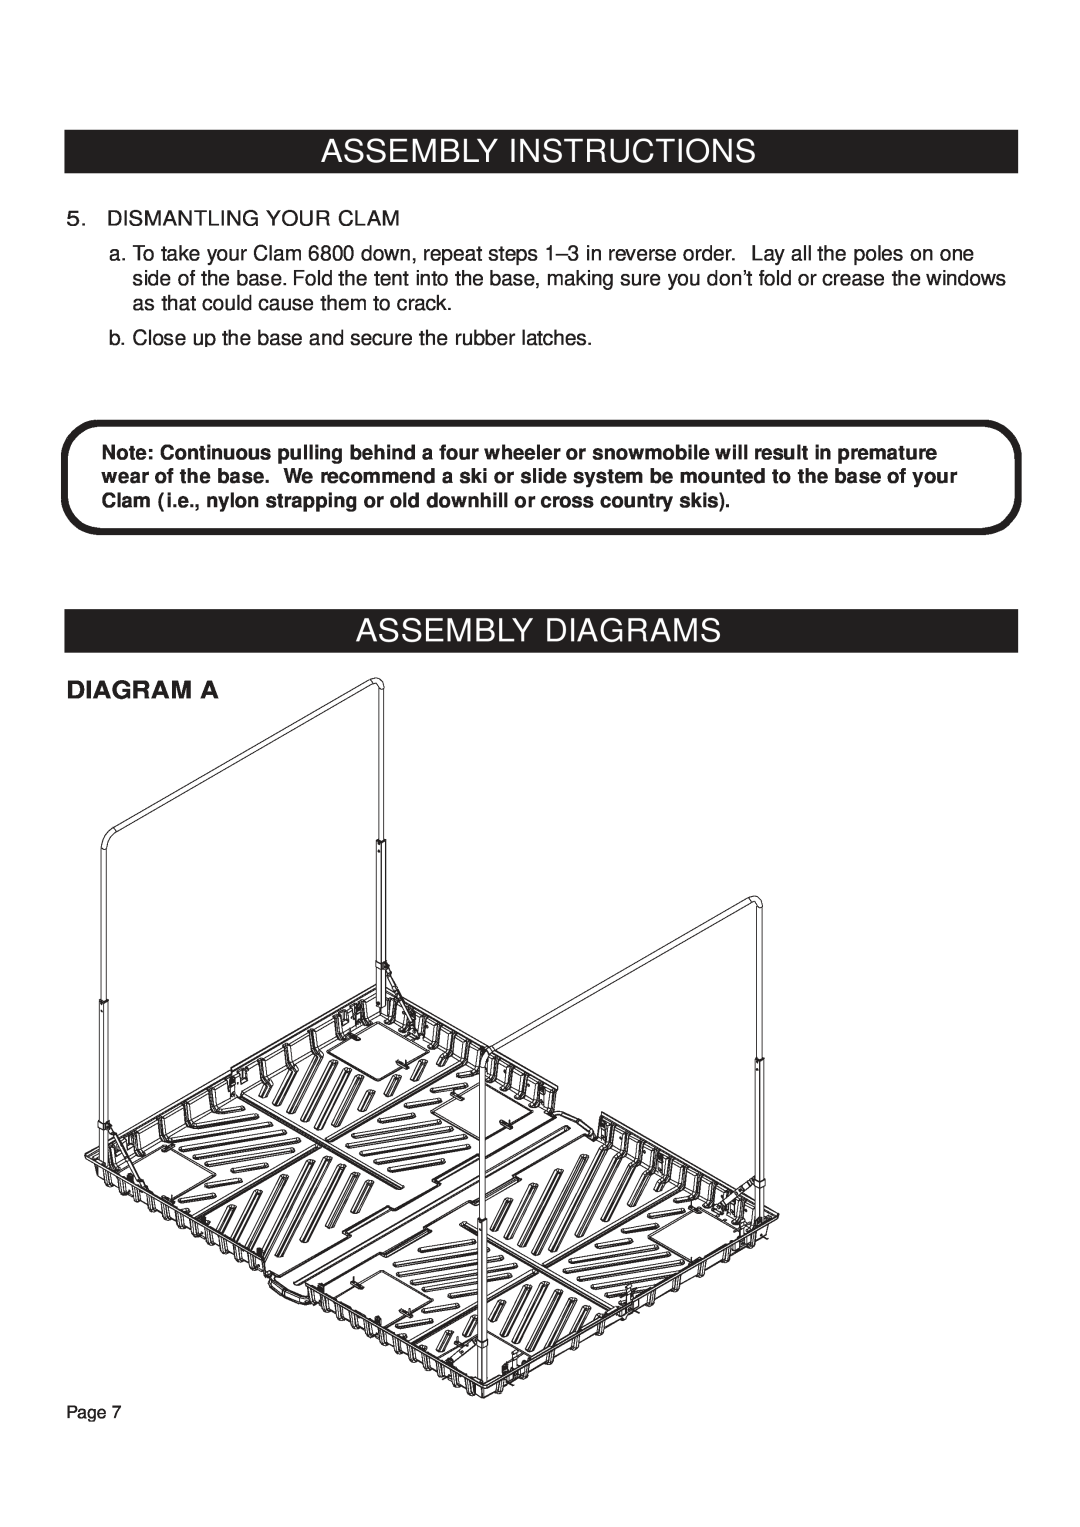 Clam Corp 8202 manual Assembly Diagrams, Diagram A, Assembly Instructions 